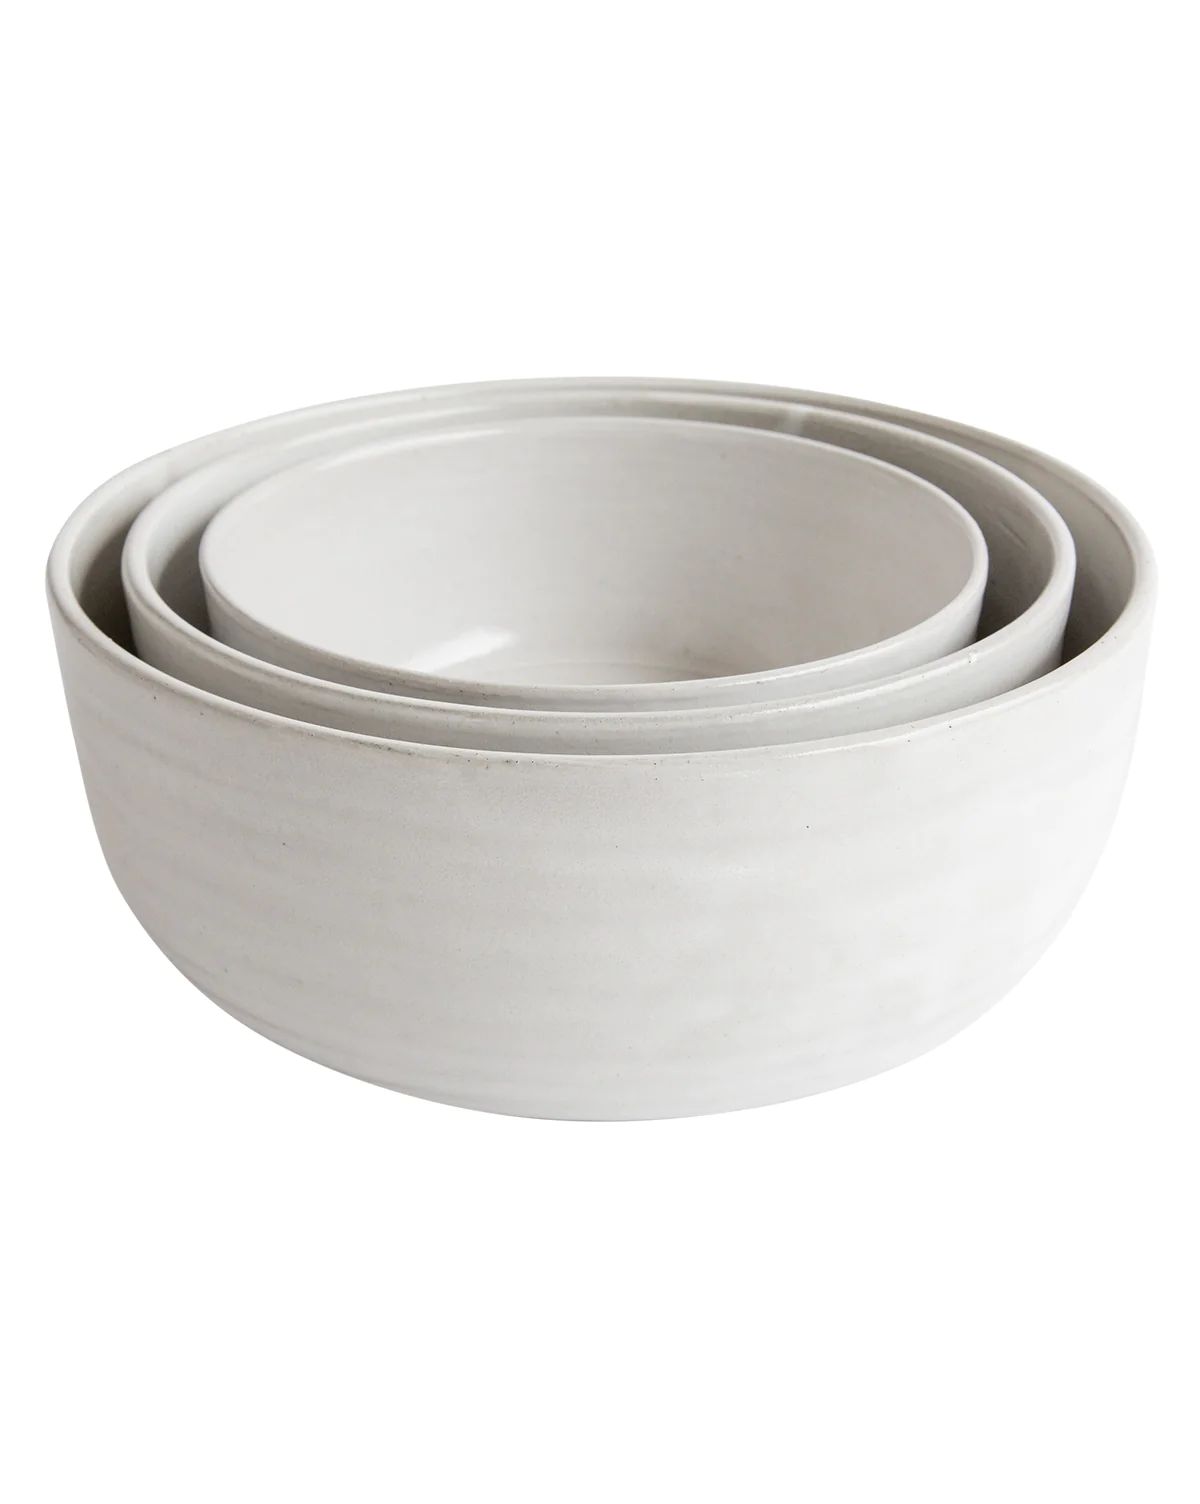 White Serving Bowls | McGee & Co.